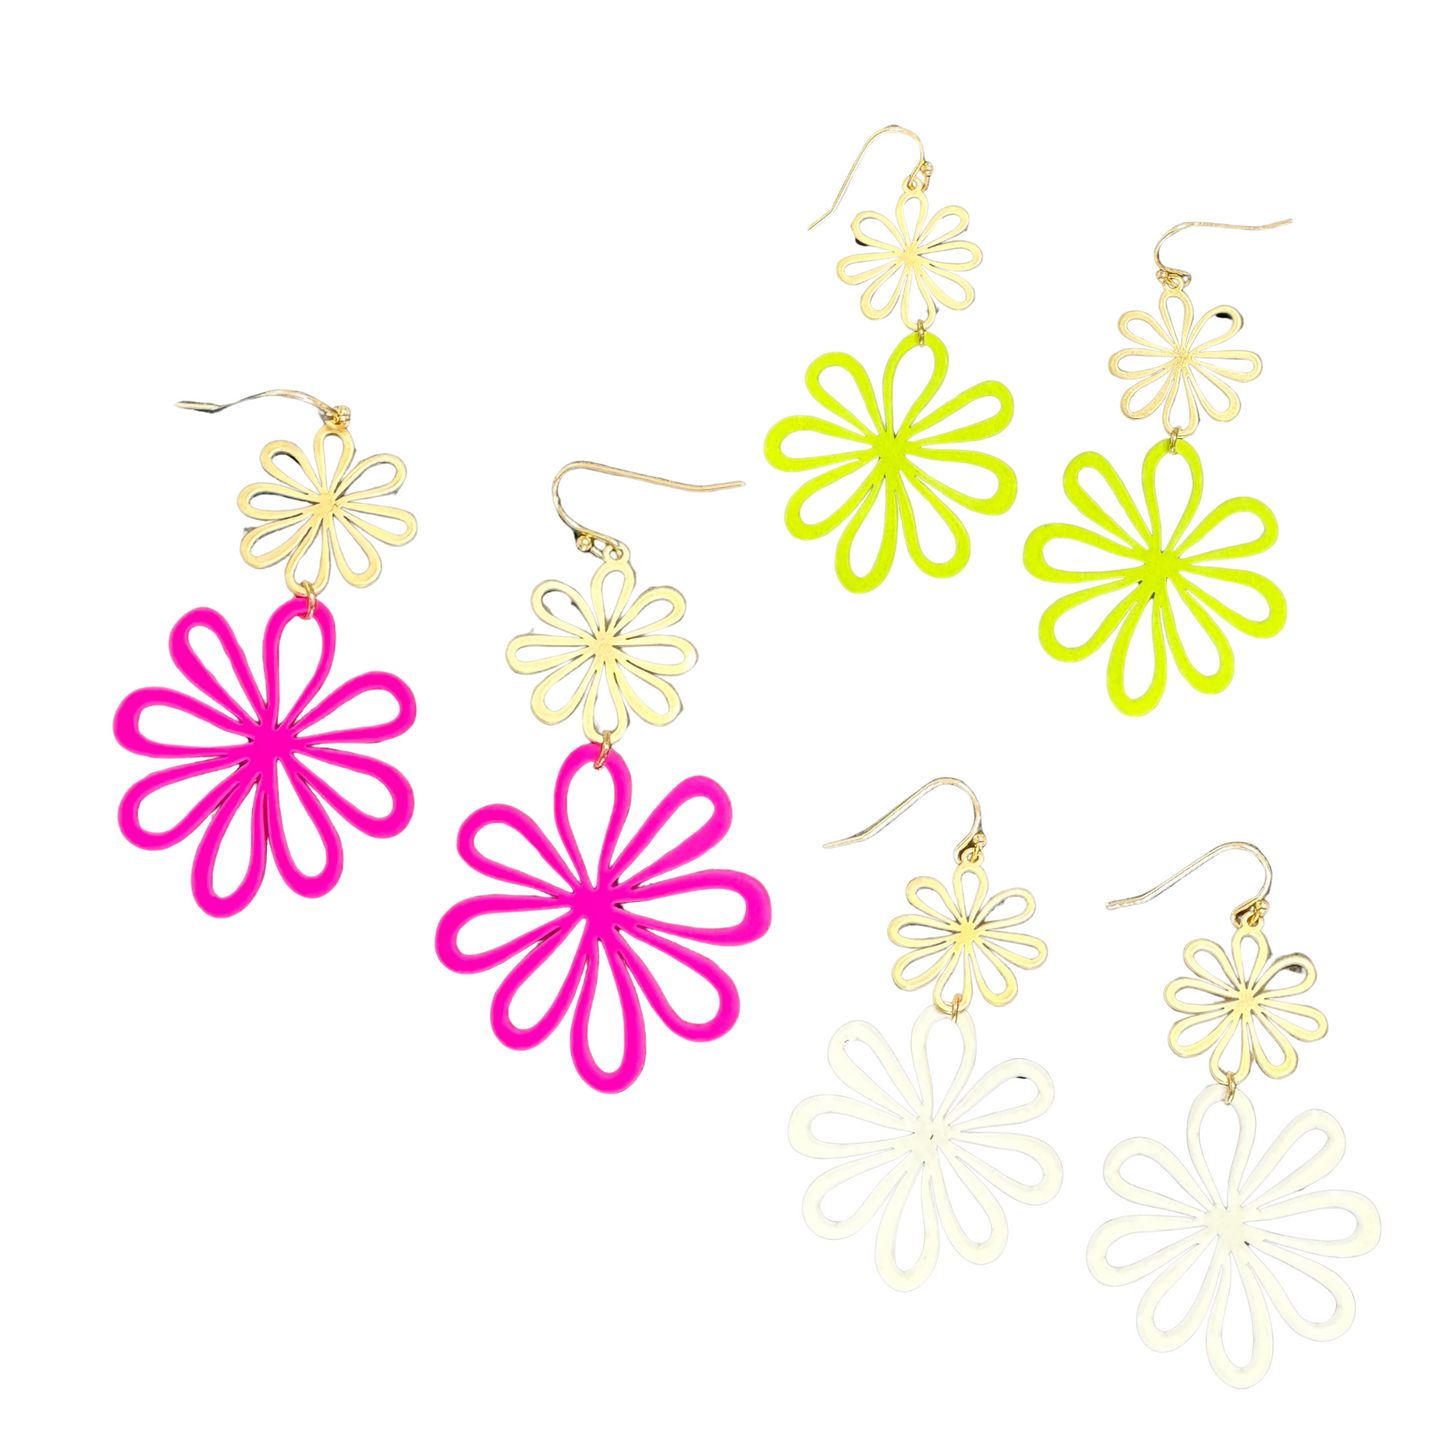 These elegant Double Flower Dangle Earrings are a must-have for any jewelry collection. The flower shaped design and gold accent add a touch of sophistication to any outfit. Available in pink, green, or white, these dangle earrings are the perfect accessory for any occasion.